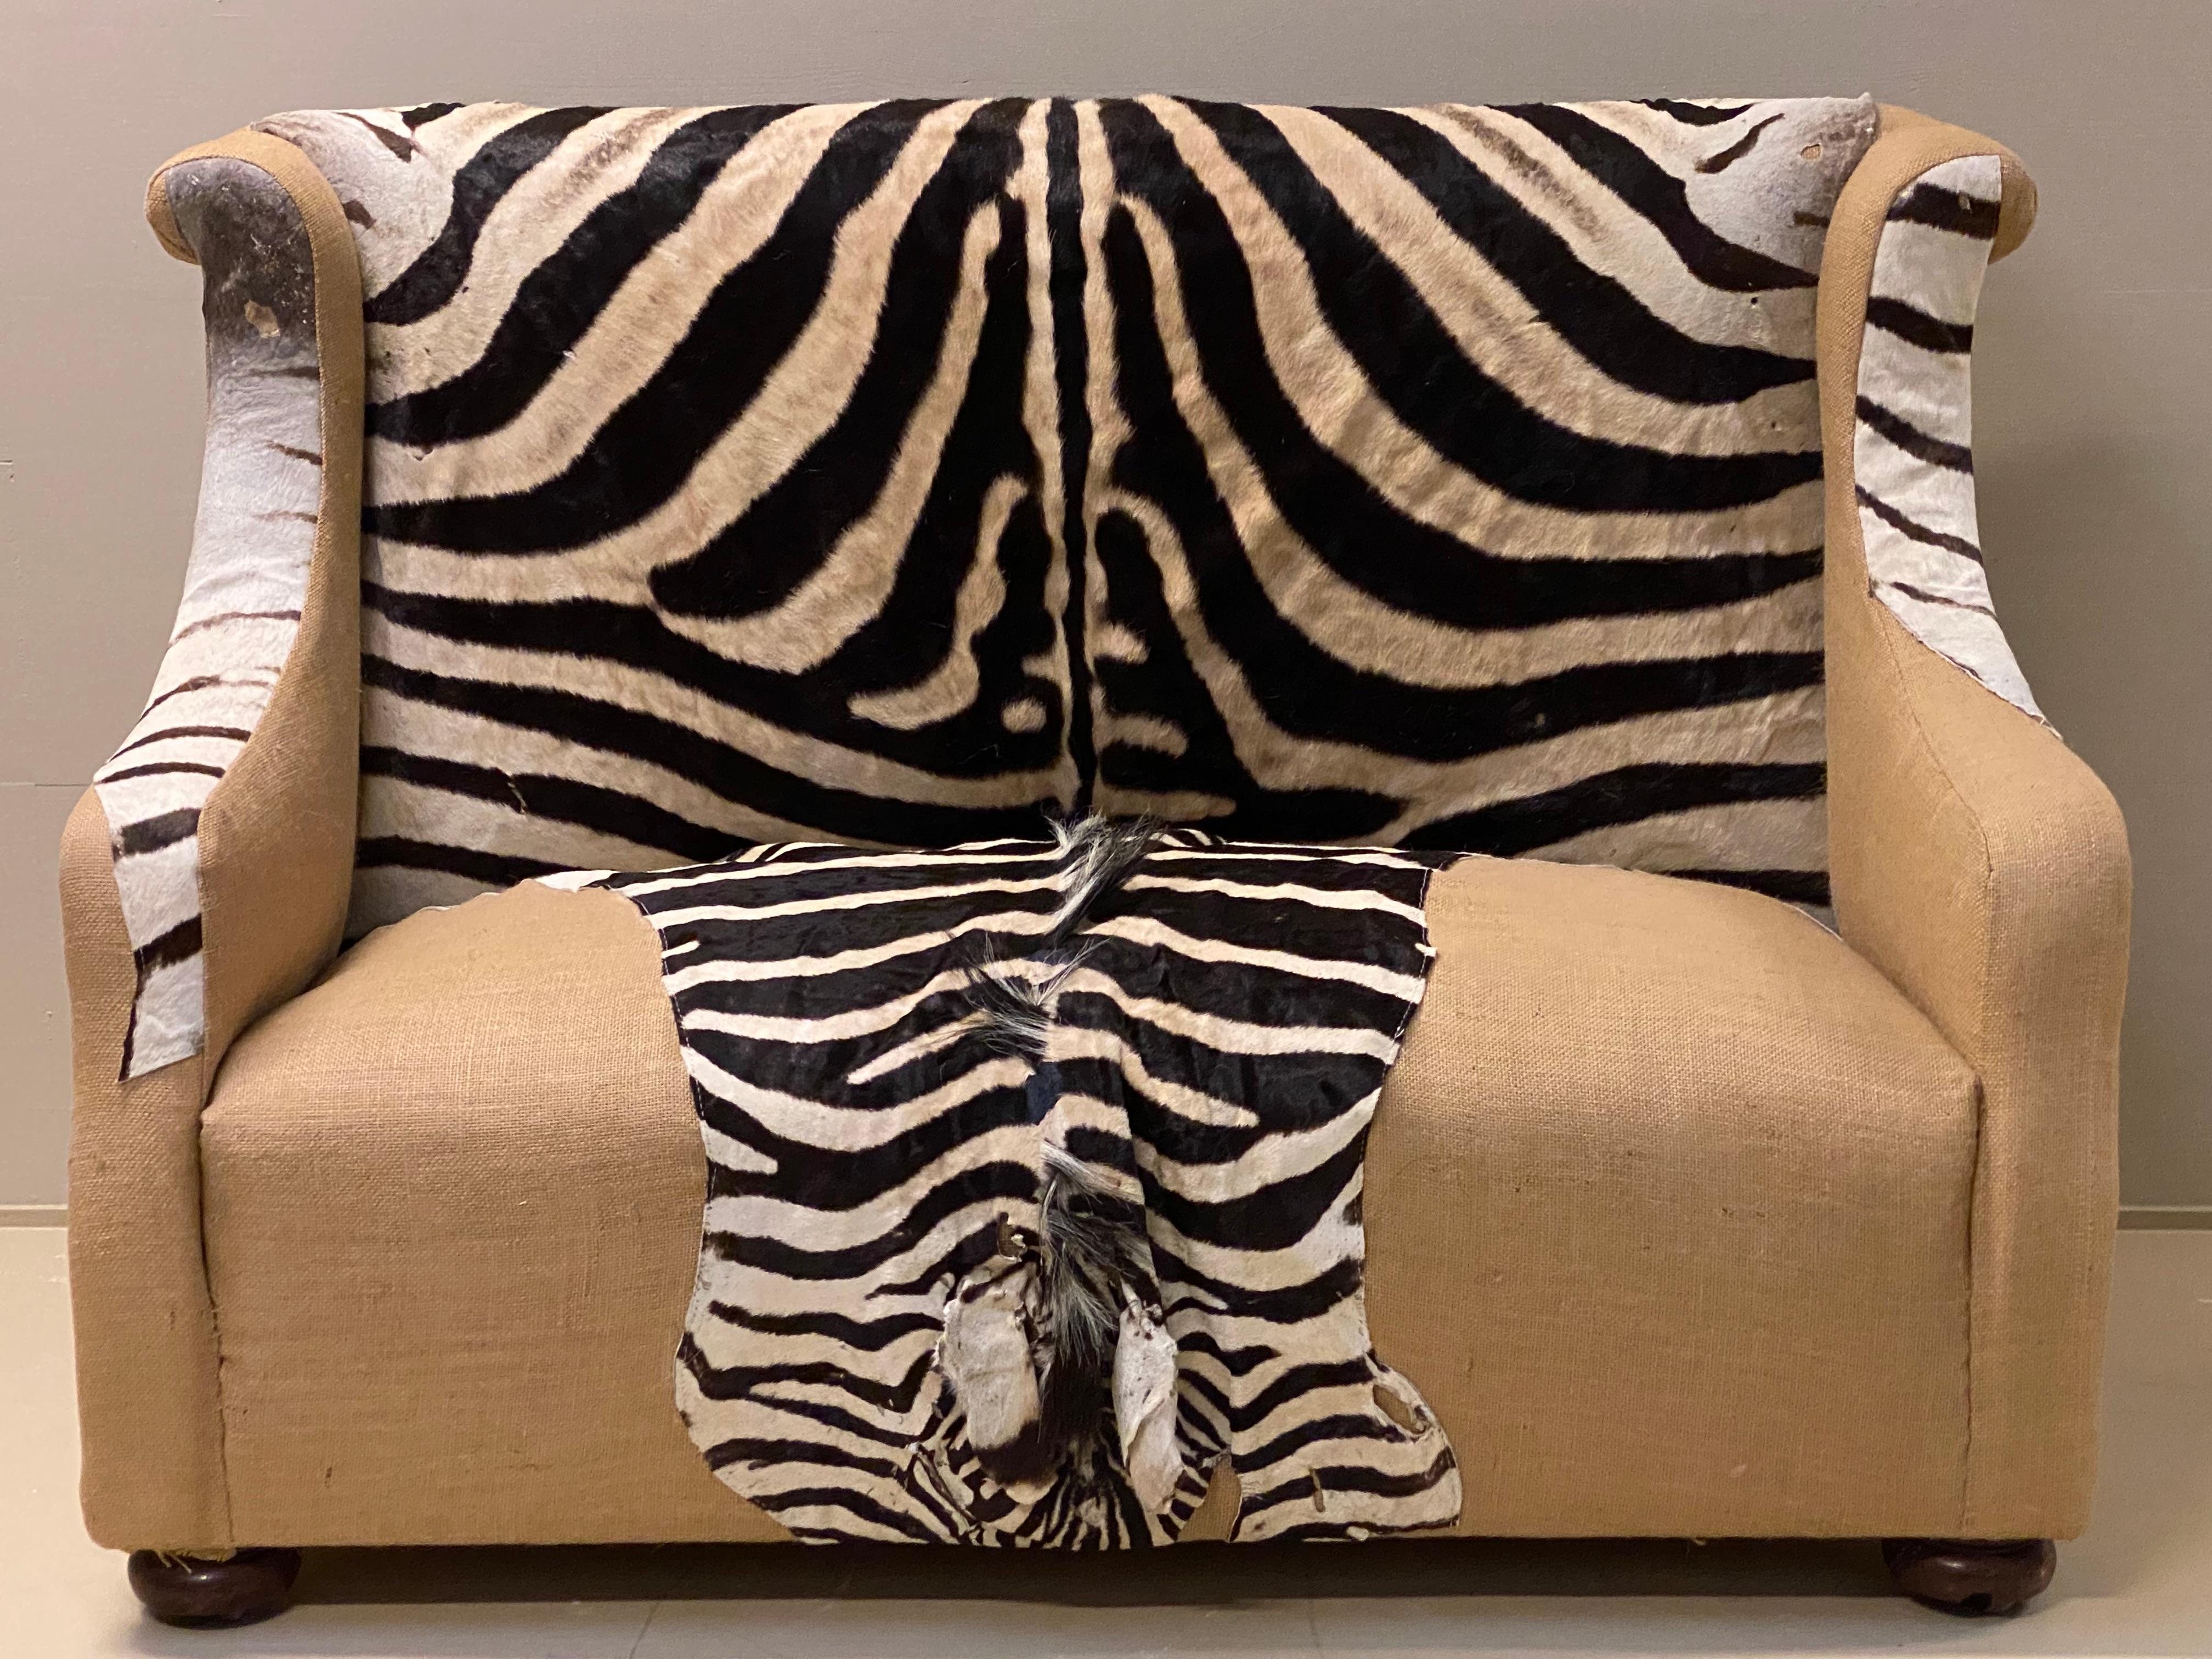 Unique Victorian two seat canape from around 1890,
fully restored and new upholstered with real Zebra Skin,
very comfortable seating, piece of character to put in the study, library or drawing room.